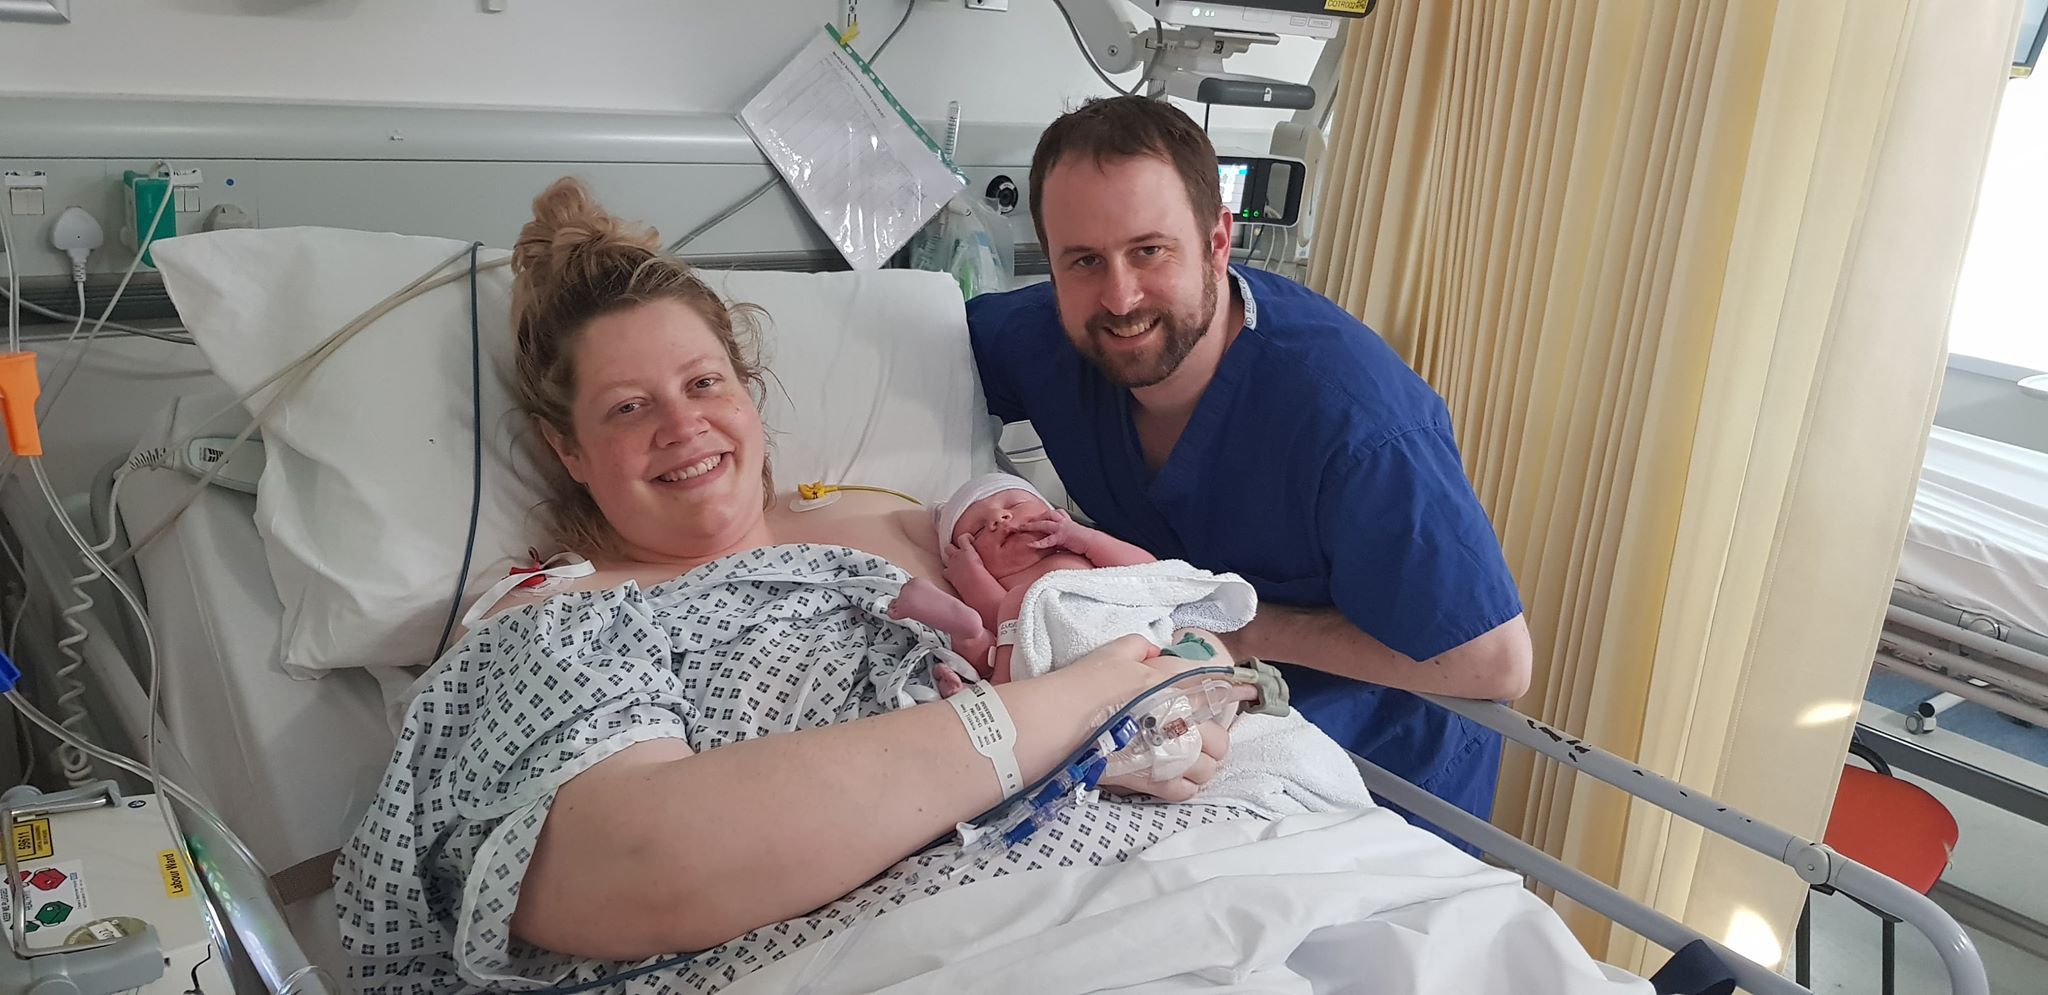 Three in hospital august 2020